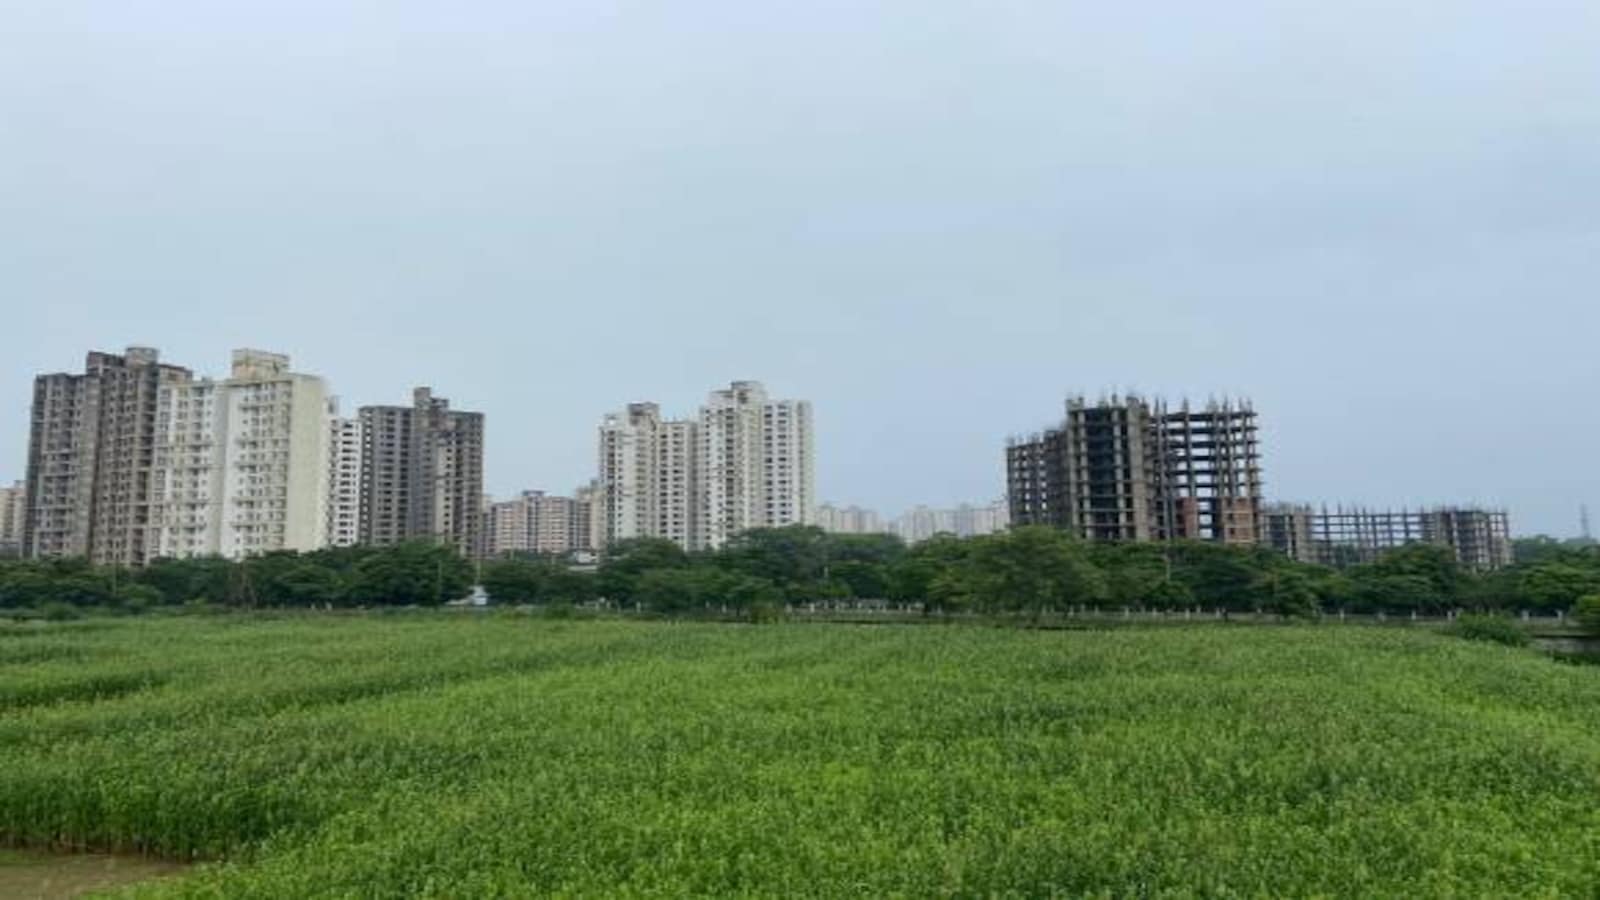 UP's Stalled Projects Move Explained for Property Investors